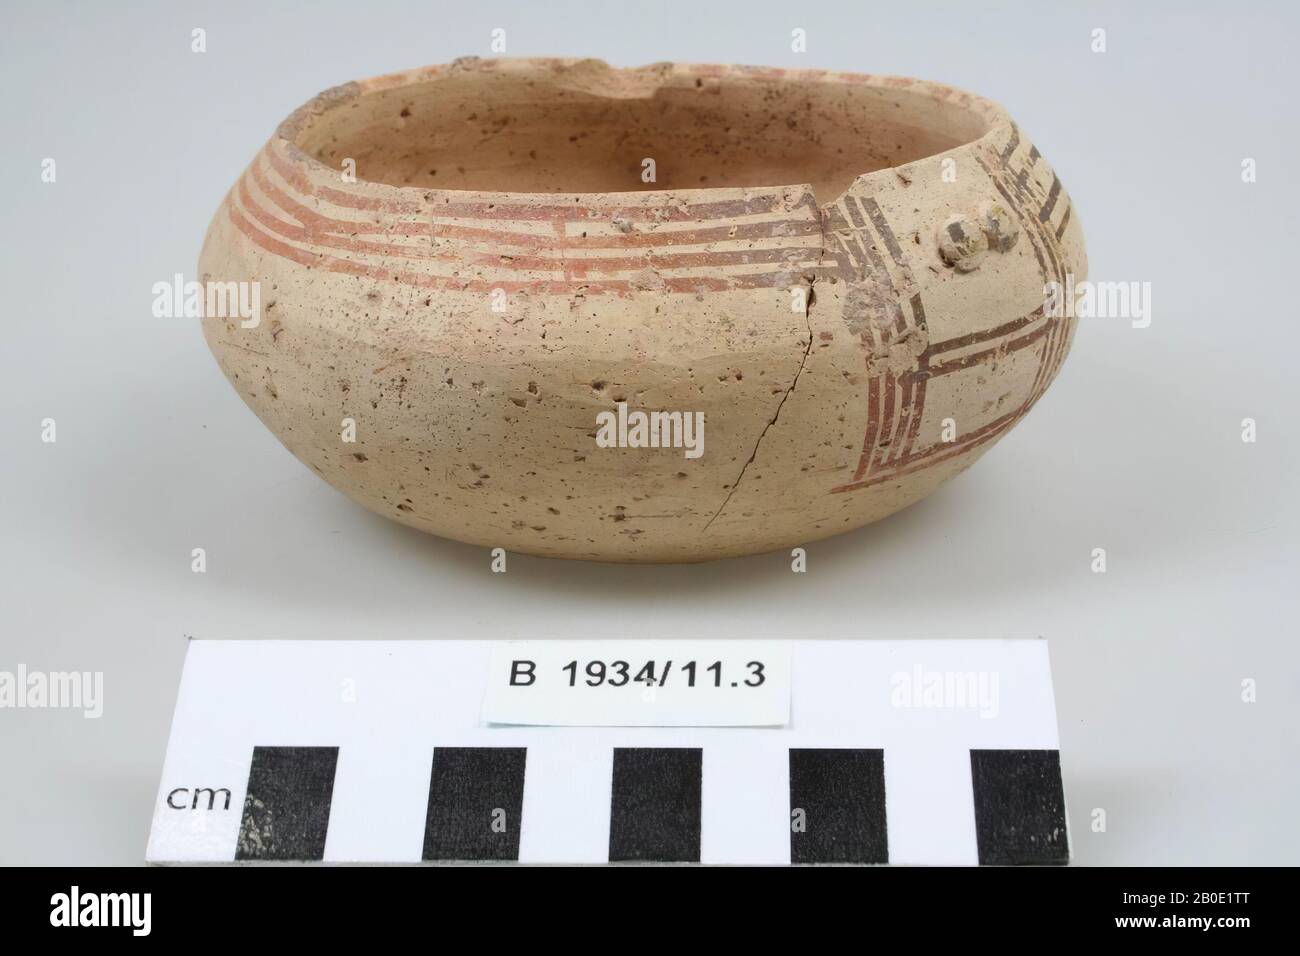 A 'closed' bowl decorated with lines, squares and circles of red paint. The tray has two nodules at two opposite places along the edge., Crockery, pottery, H 5.9 cm, D 14.2 cm, D neck 11.7 cm, Iron Age III 800-600 BC, Iran Stock Photo